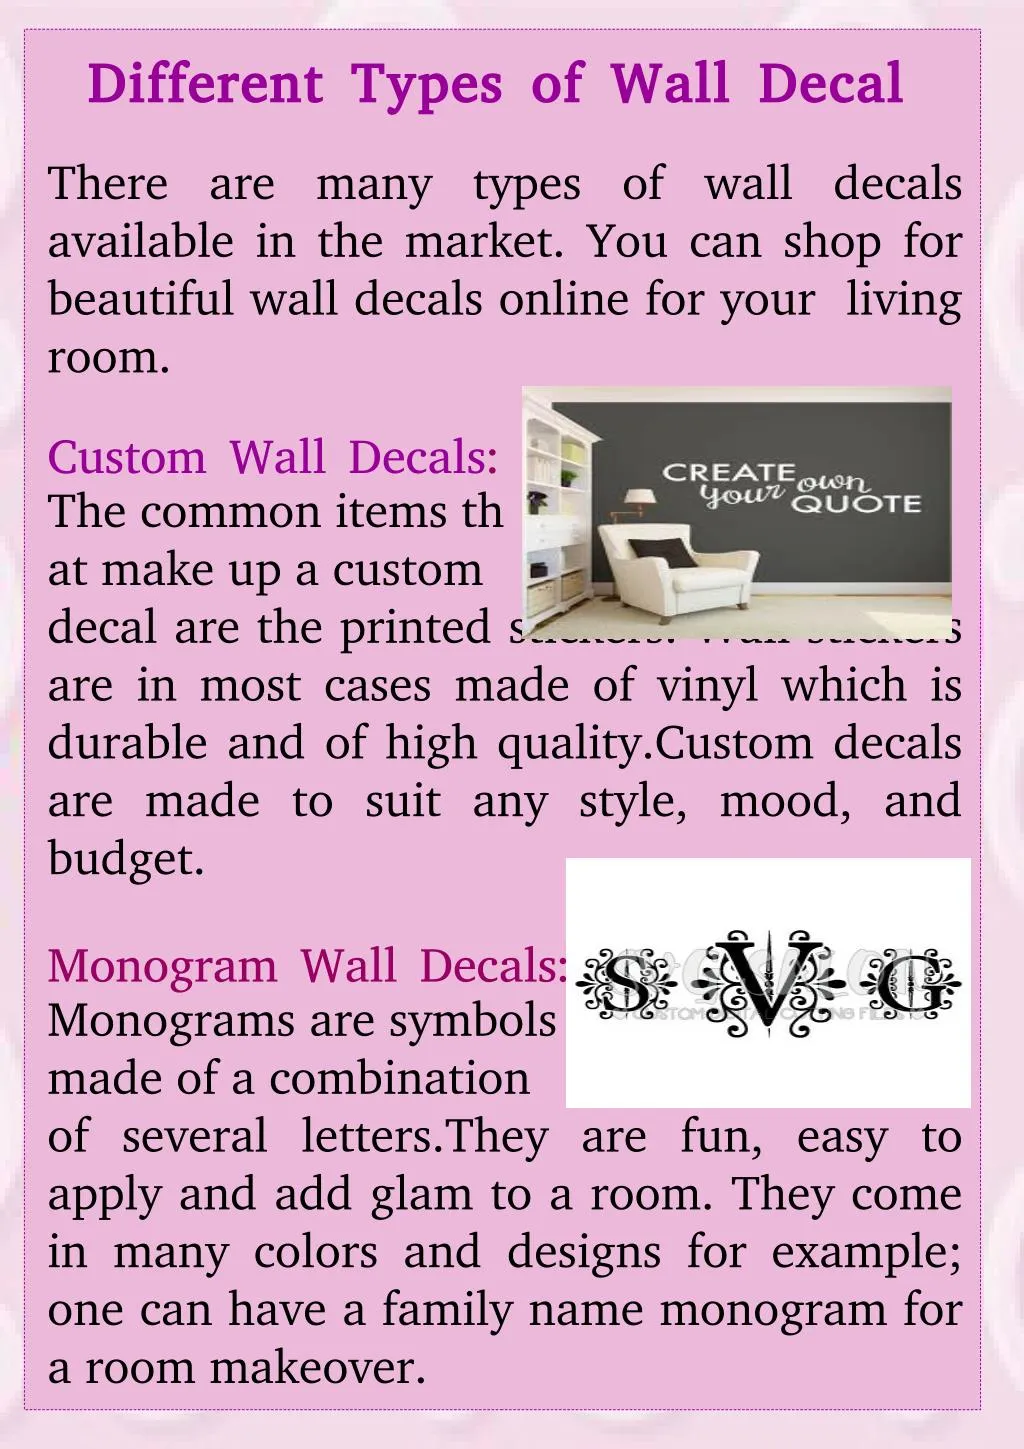 different types of wall decal different types n.